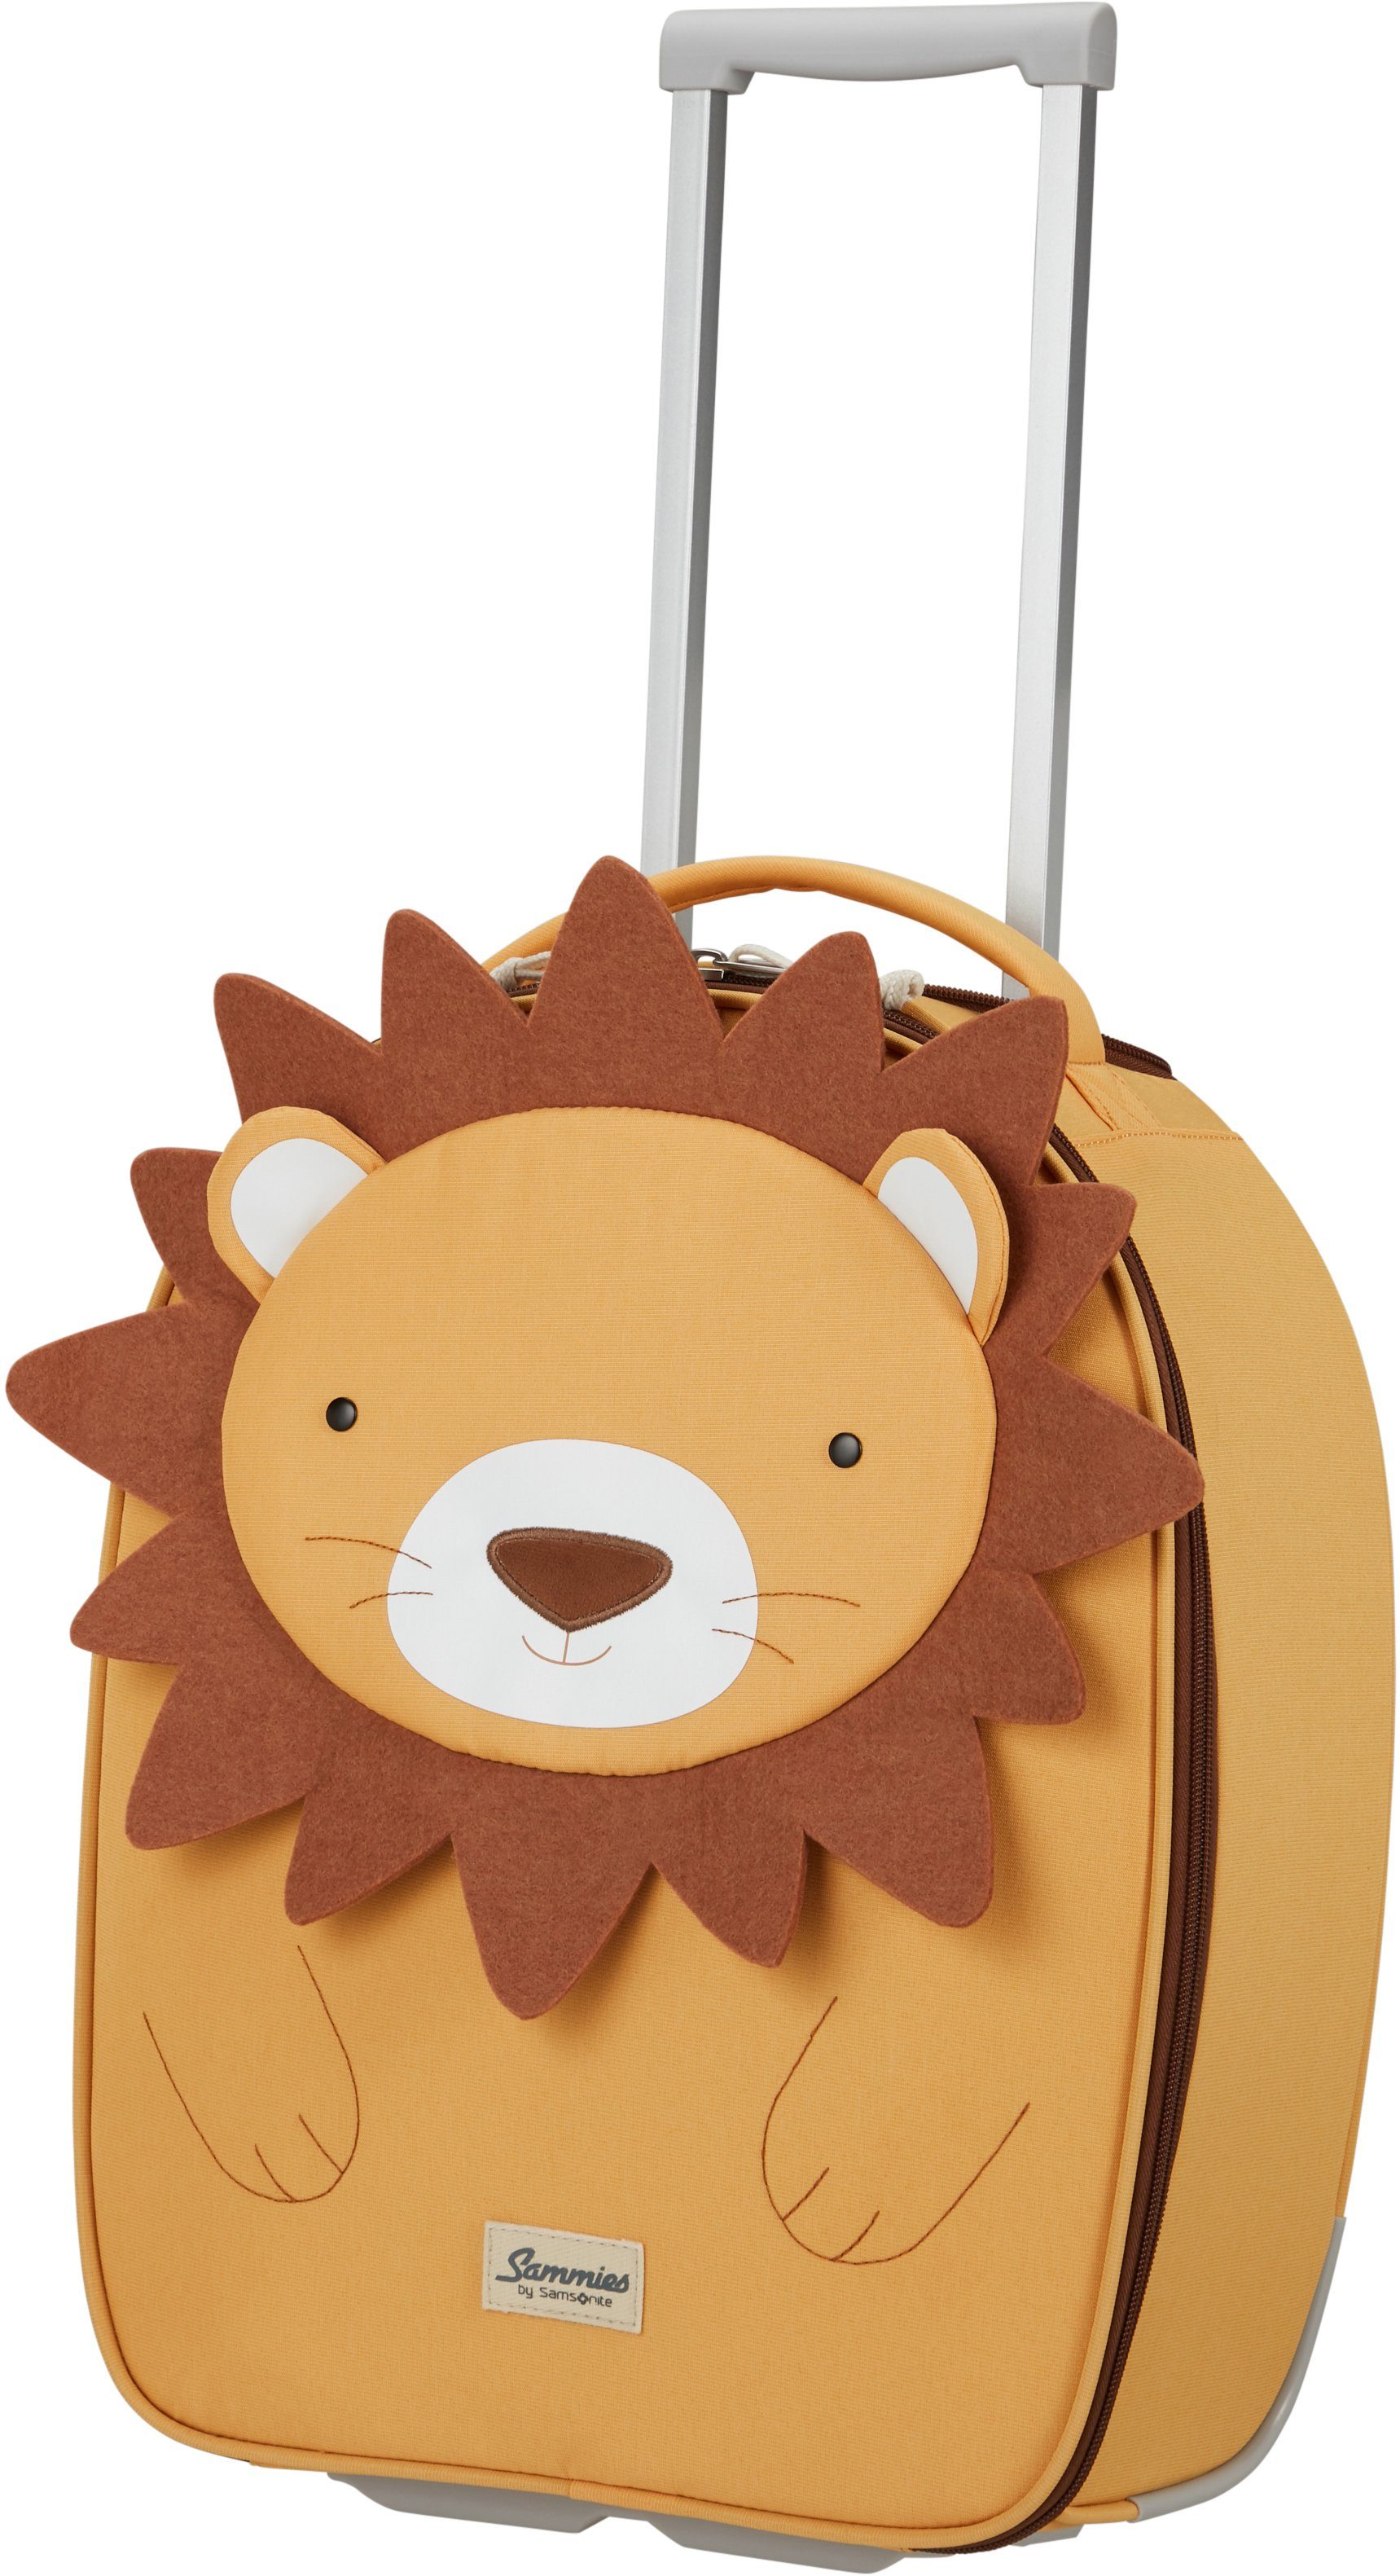 Samsonite ECO, Lion Material Kinderkoffer Rollen, recyceltem Lester, 2 Sammies Happy aus